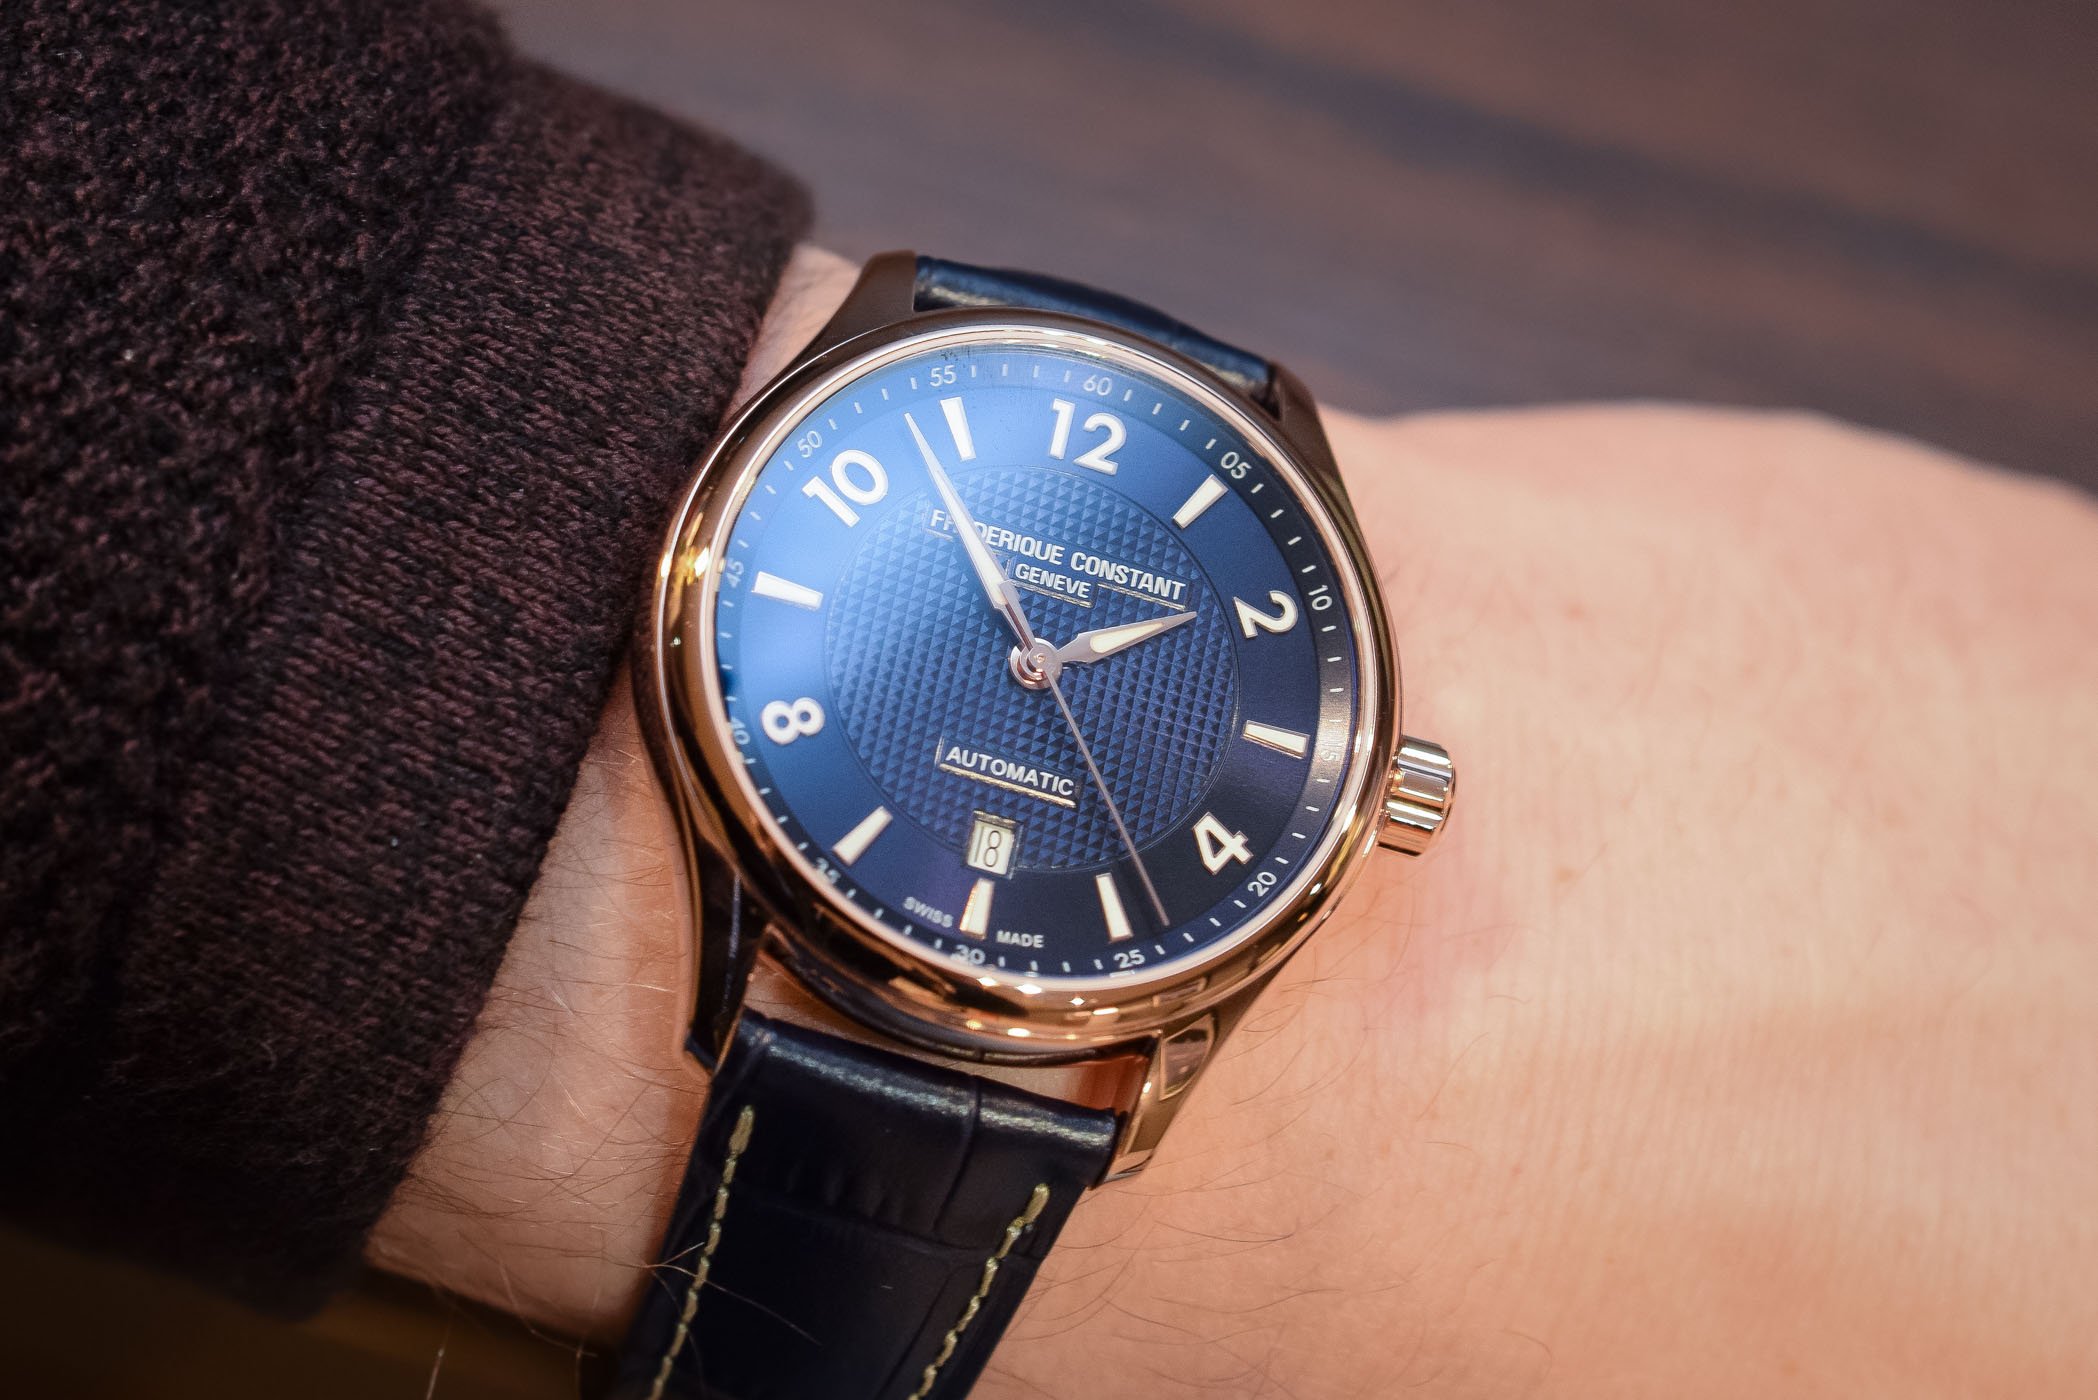 2018 Frederique Constant Automatic Runabout Limited Edition